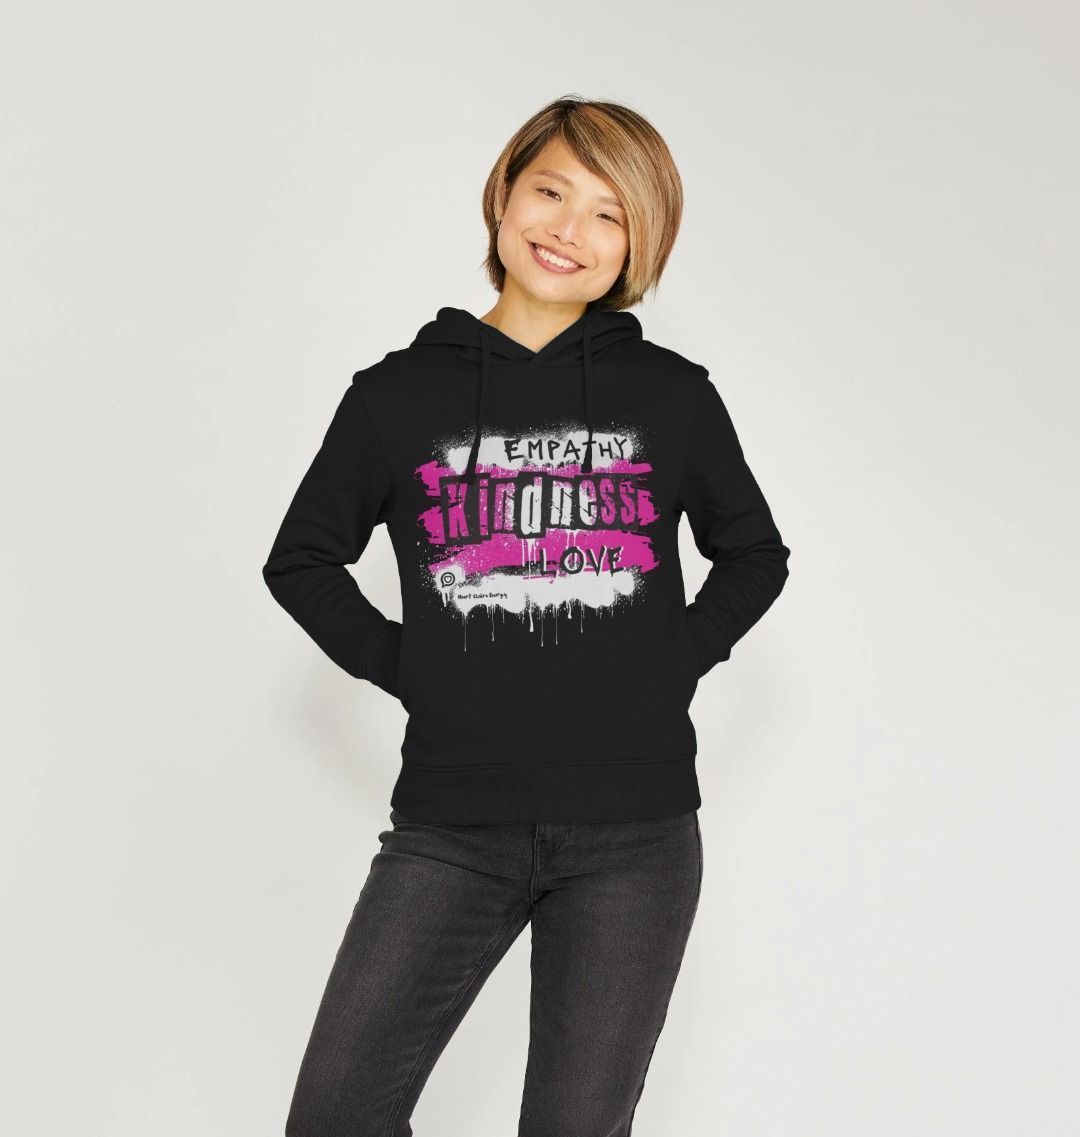 female model wears black hooded sweatshirt with the heart chakra energy design in bright pink 